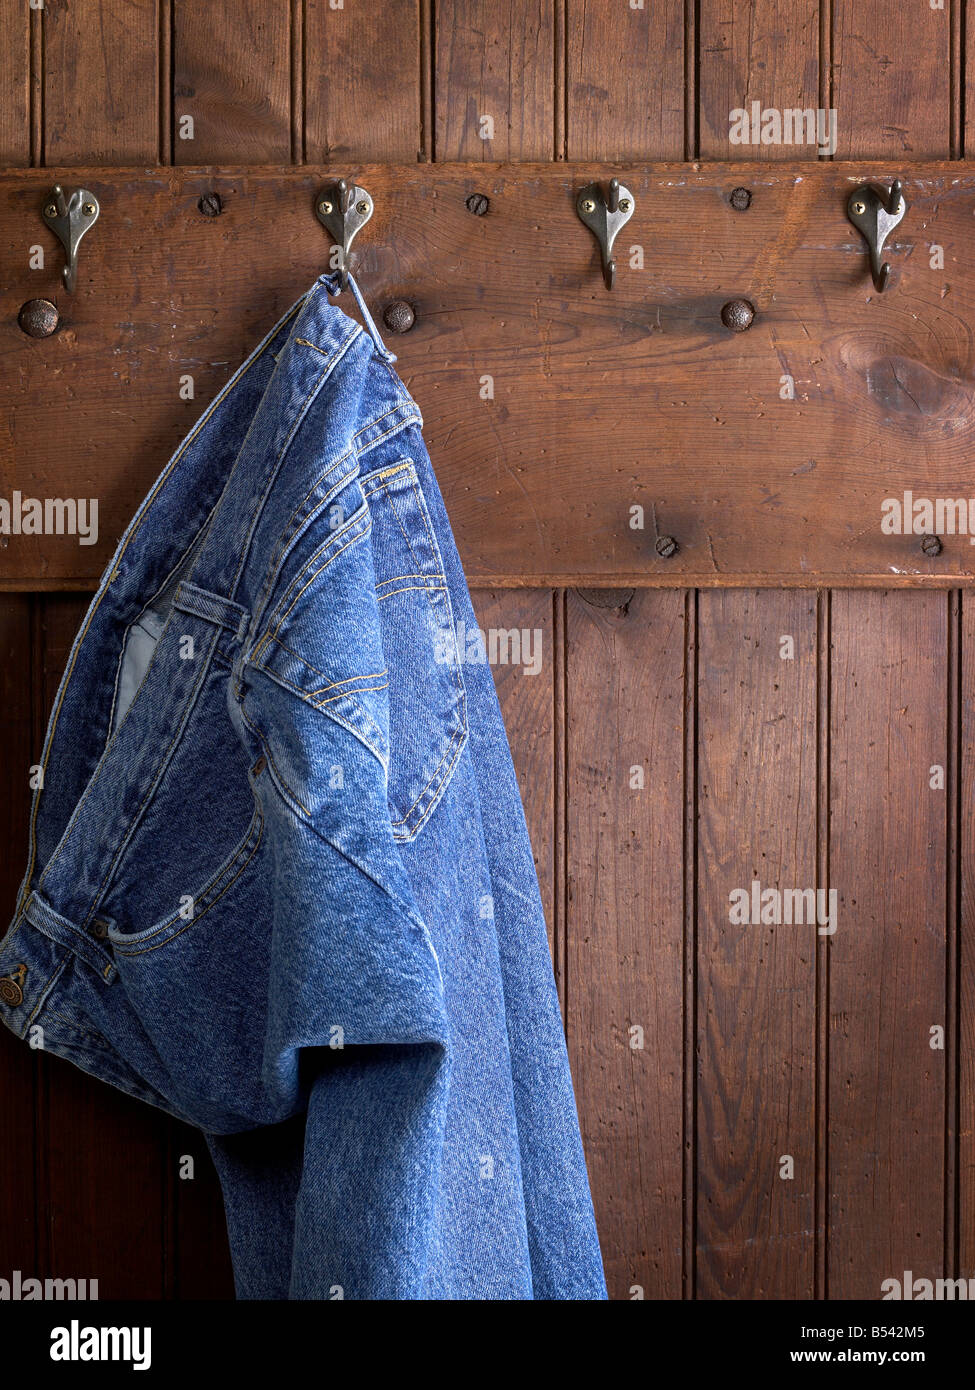 Blue Jeans Hanging On Hook Weathered Wood Wall Stock Photo - Alamy